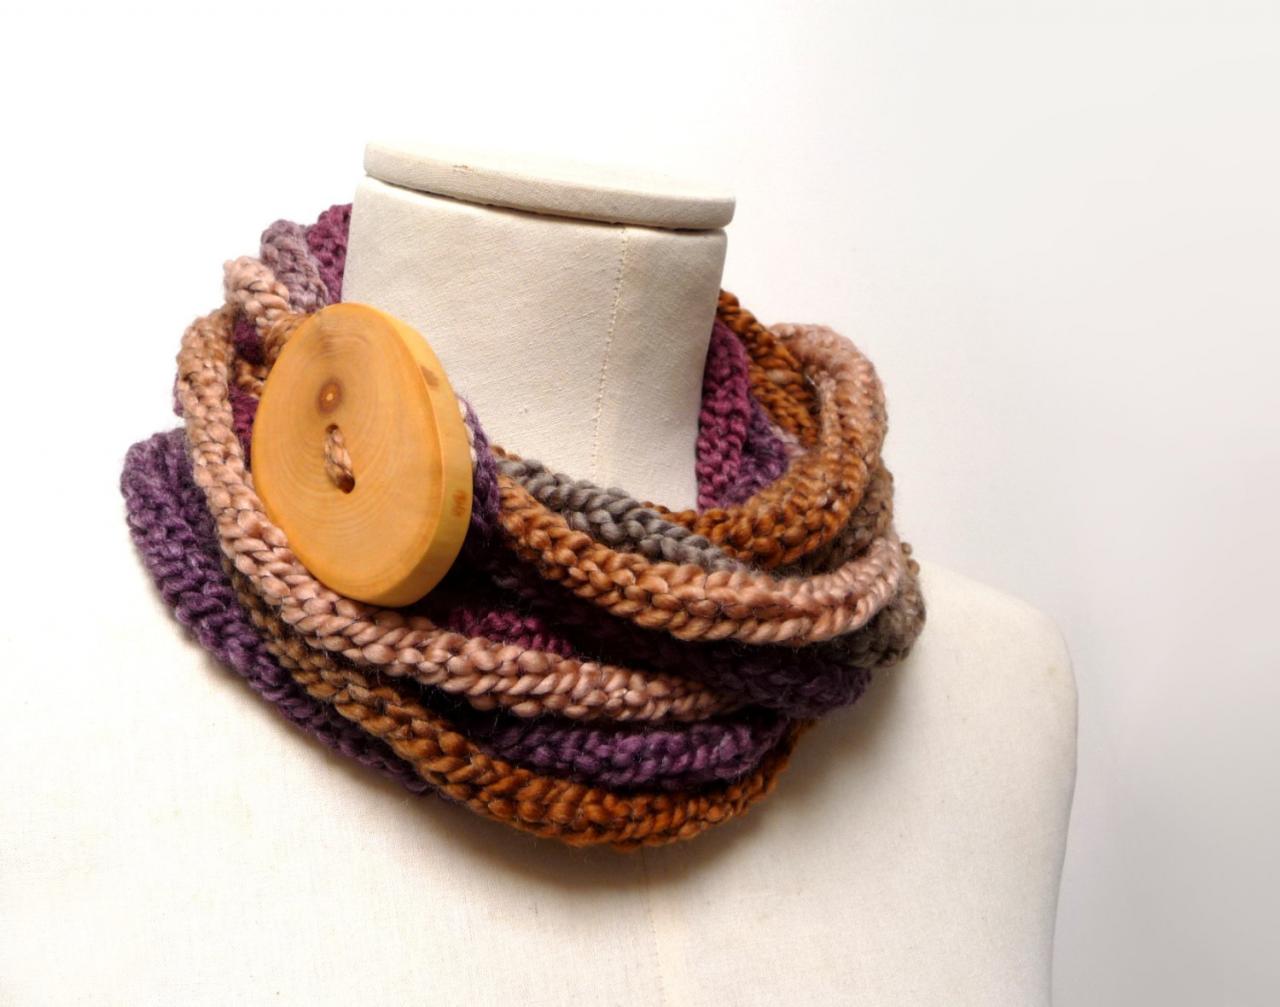 Loop Infinity Scarf Necklace, Knitted Scarlette Neckwarmer - Brown, Beige, Purple, Mauve Ombre Yarn With Giant Wood Button